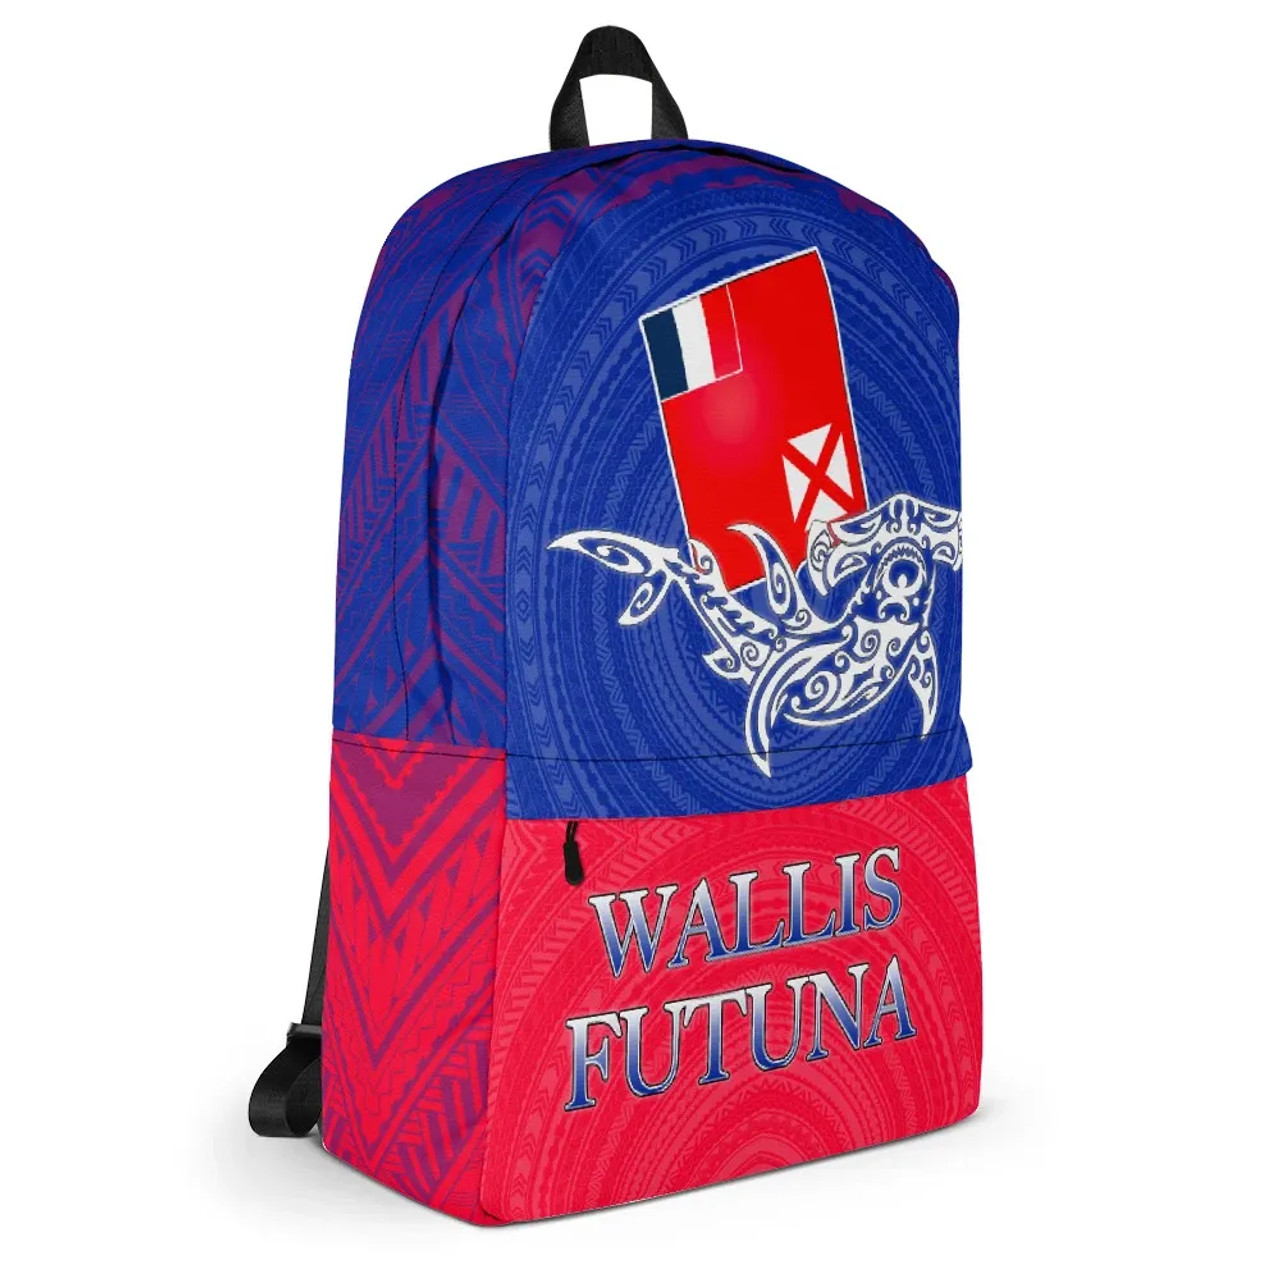 Wallis And Futuna Backpack - Shark With Coat Of Arms 6